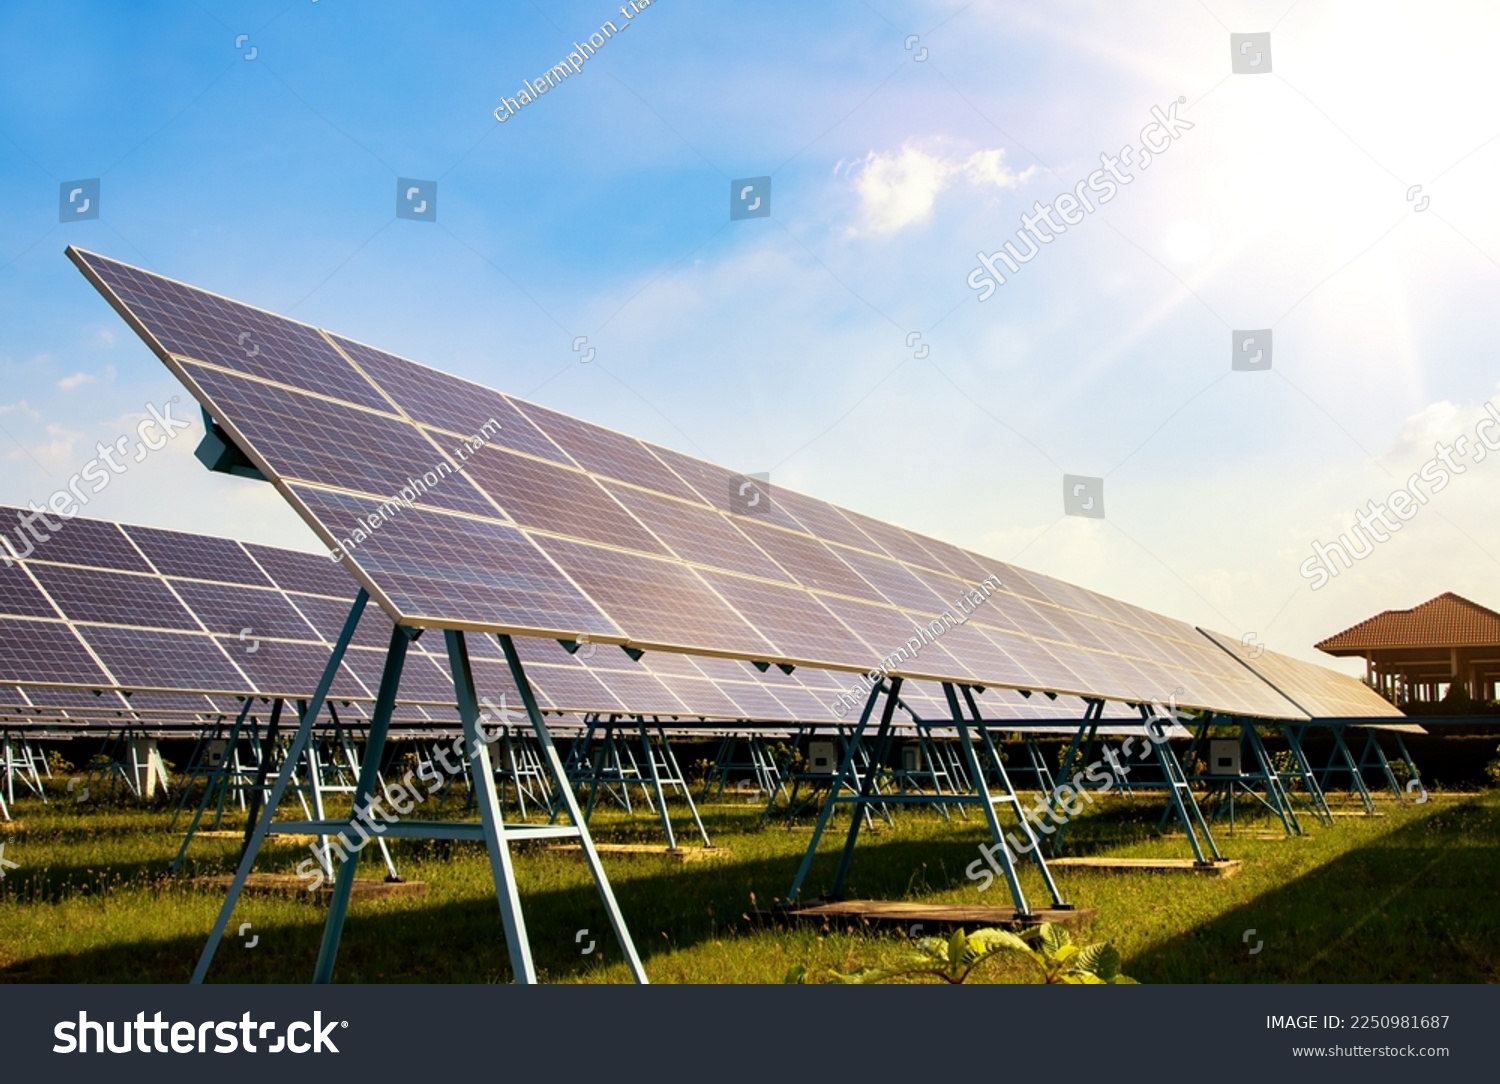 Solar panel renewable energy clean energy green energy photovoltaic large scale solar panel power station provides supply power to urban, industrial and agricultural sectors and households. #2250981687